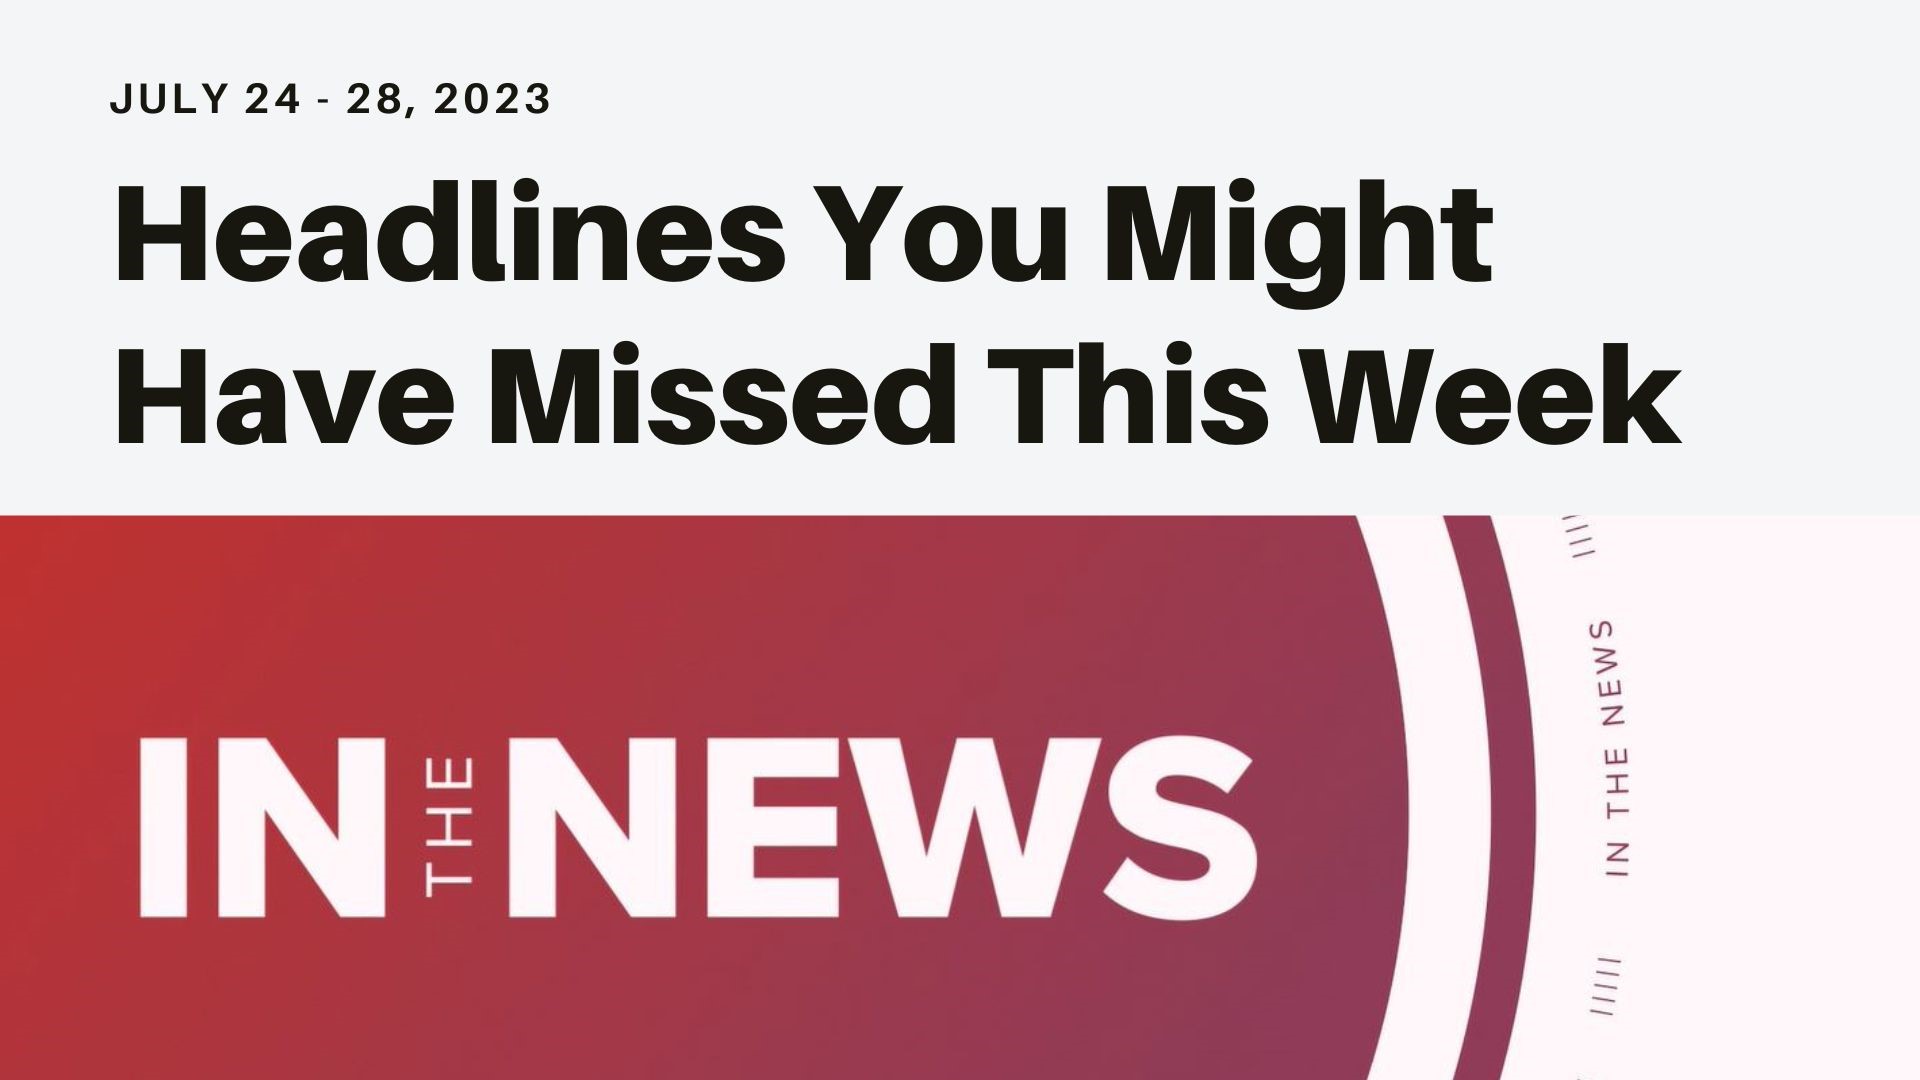 A look at some of the top headlines you might have missed this week from a judge blocking a Biden administration asylum rule to a UFO hearing and Emmys postponed.